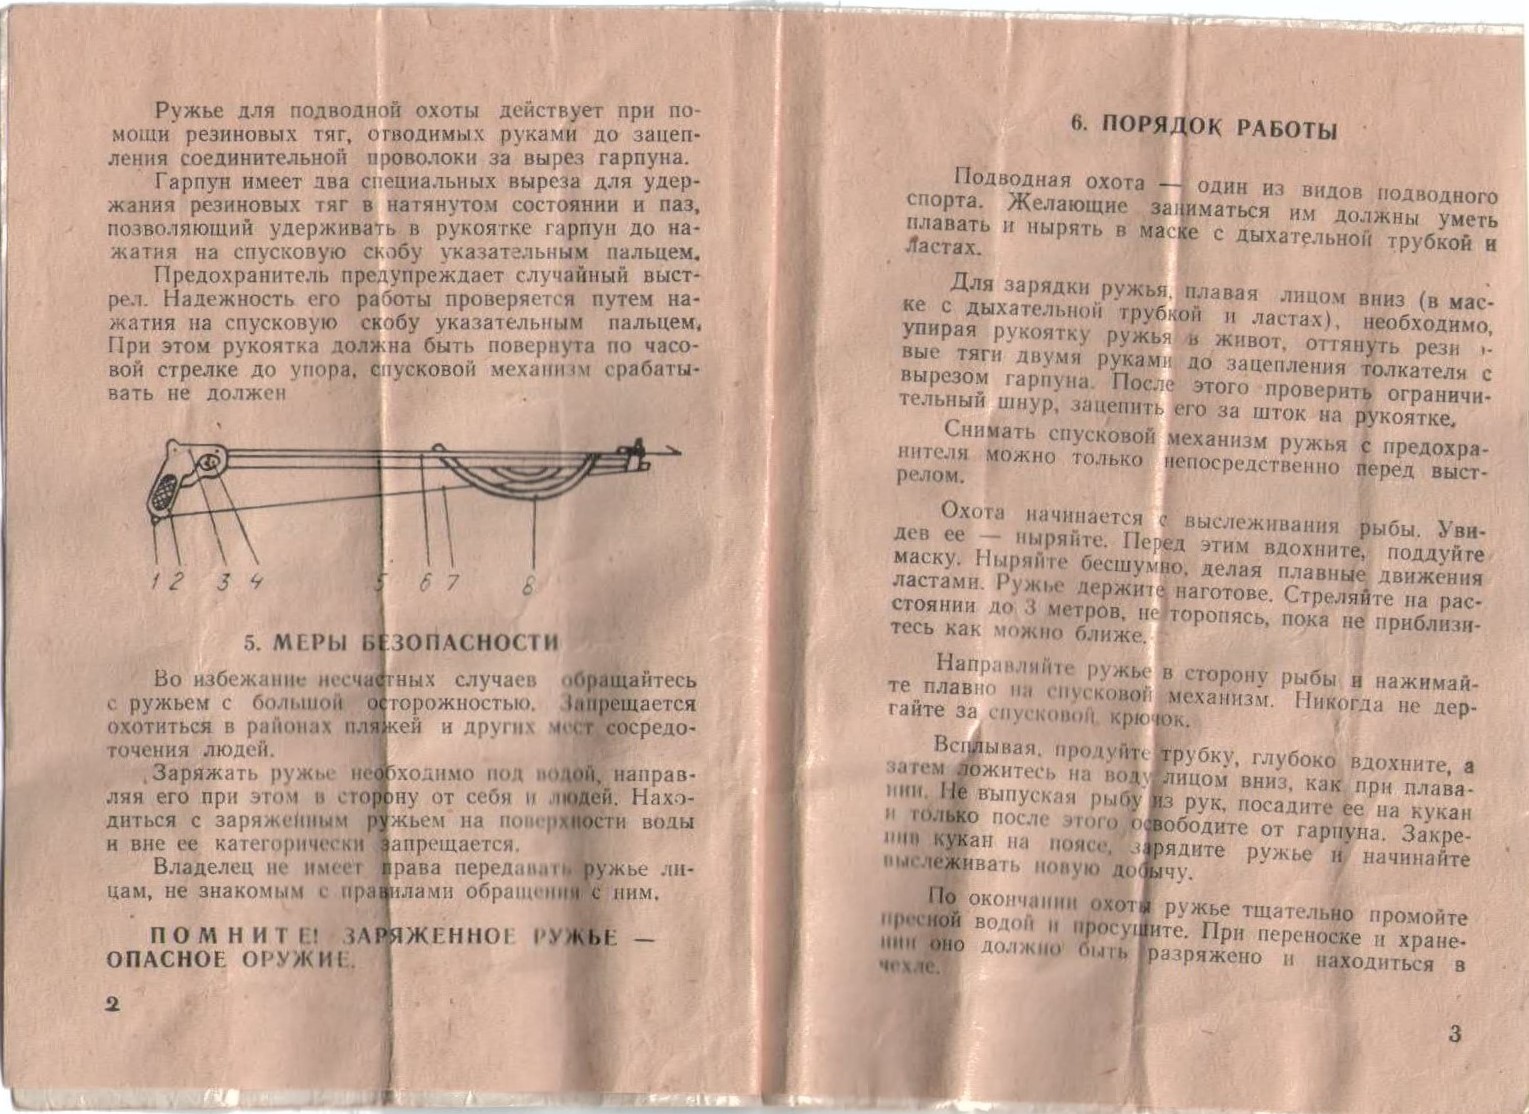 Soviet R model page 2 and 3.jpg